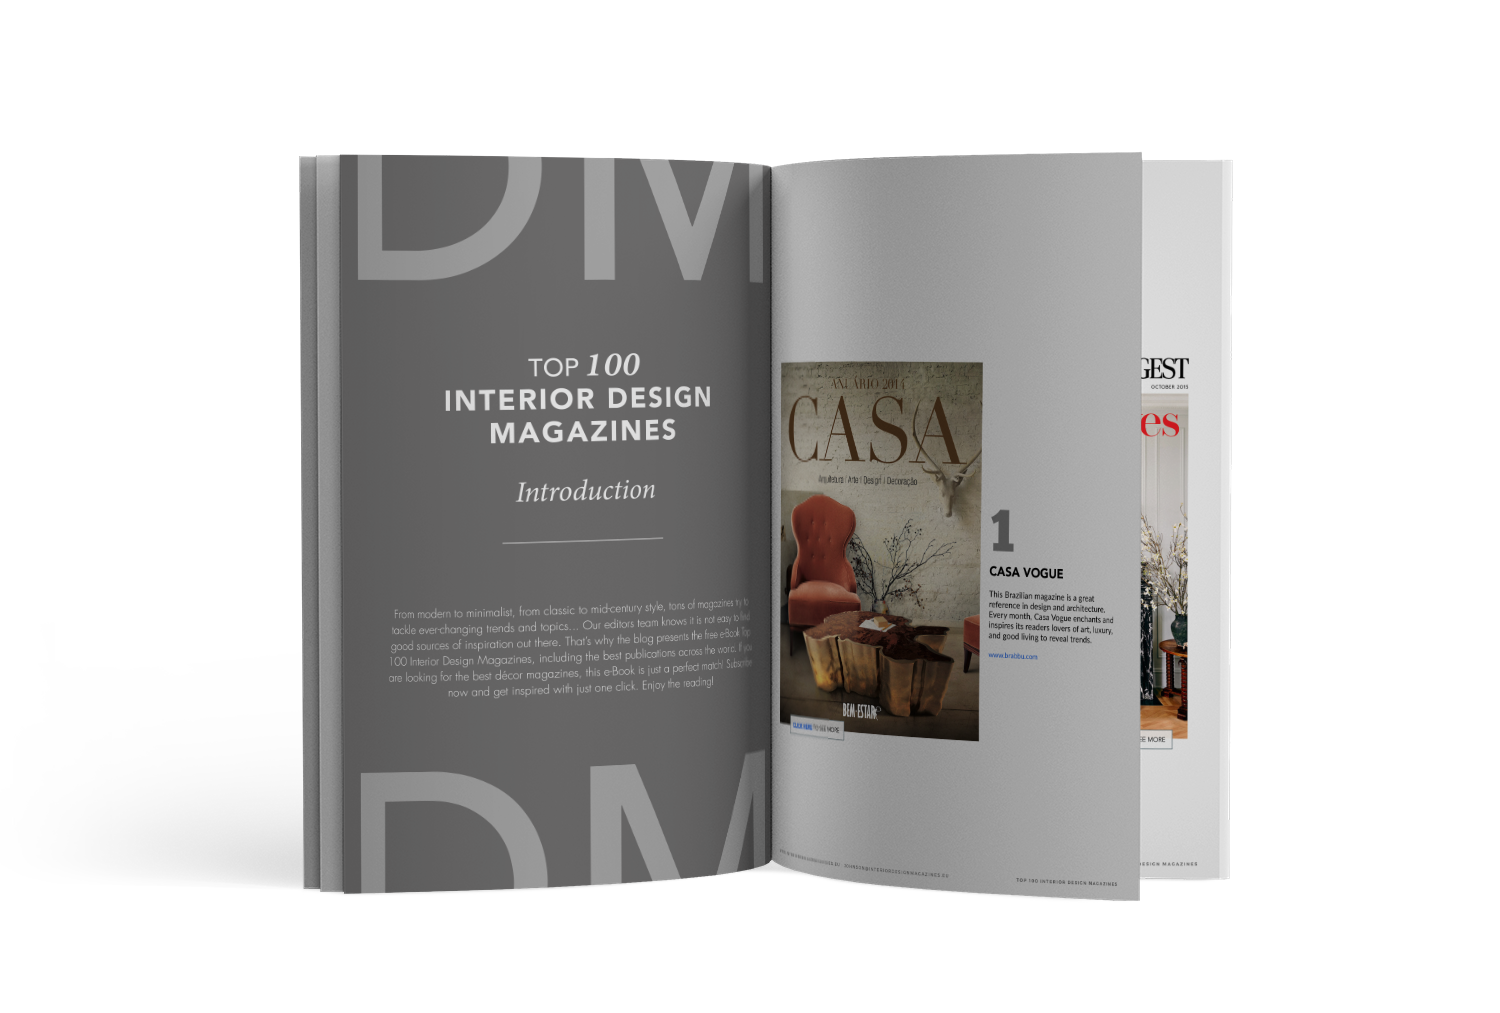 DOWNLOAD FREE EBOOK - Top 100 Interior Design Magazines Every Interior Designer Should Know ➤ To see more news about the Interior Design Magazines in the world visit us at www.interiordesignmagazines.eu #interiordesignmagazines #designmagazines #interiordesign @imagazines